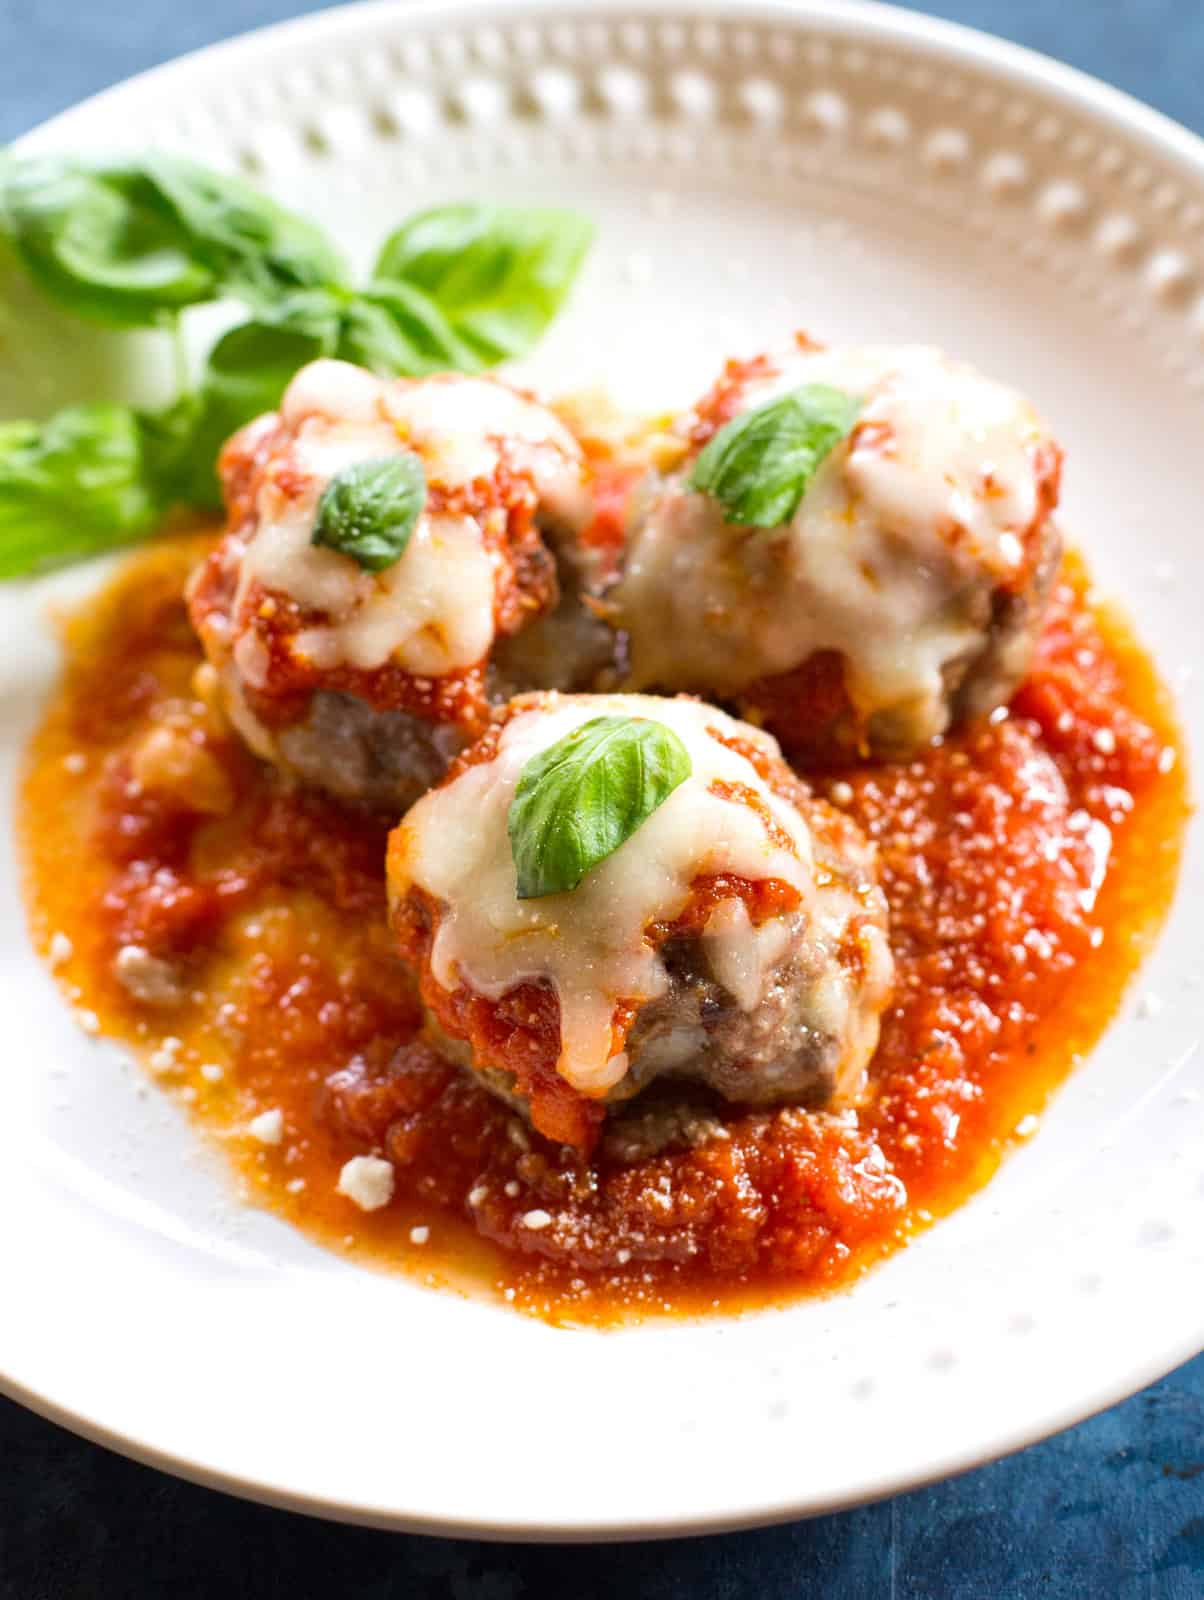 (Keto) Meatballs Recipe - The Girl Who Ate Everything